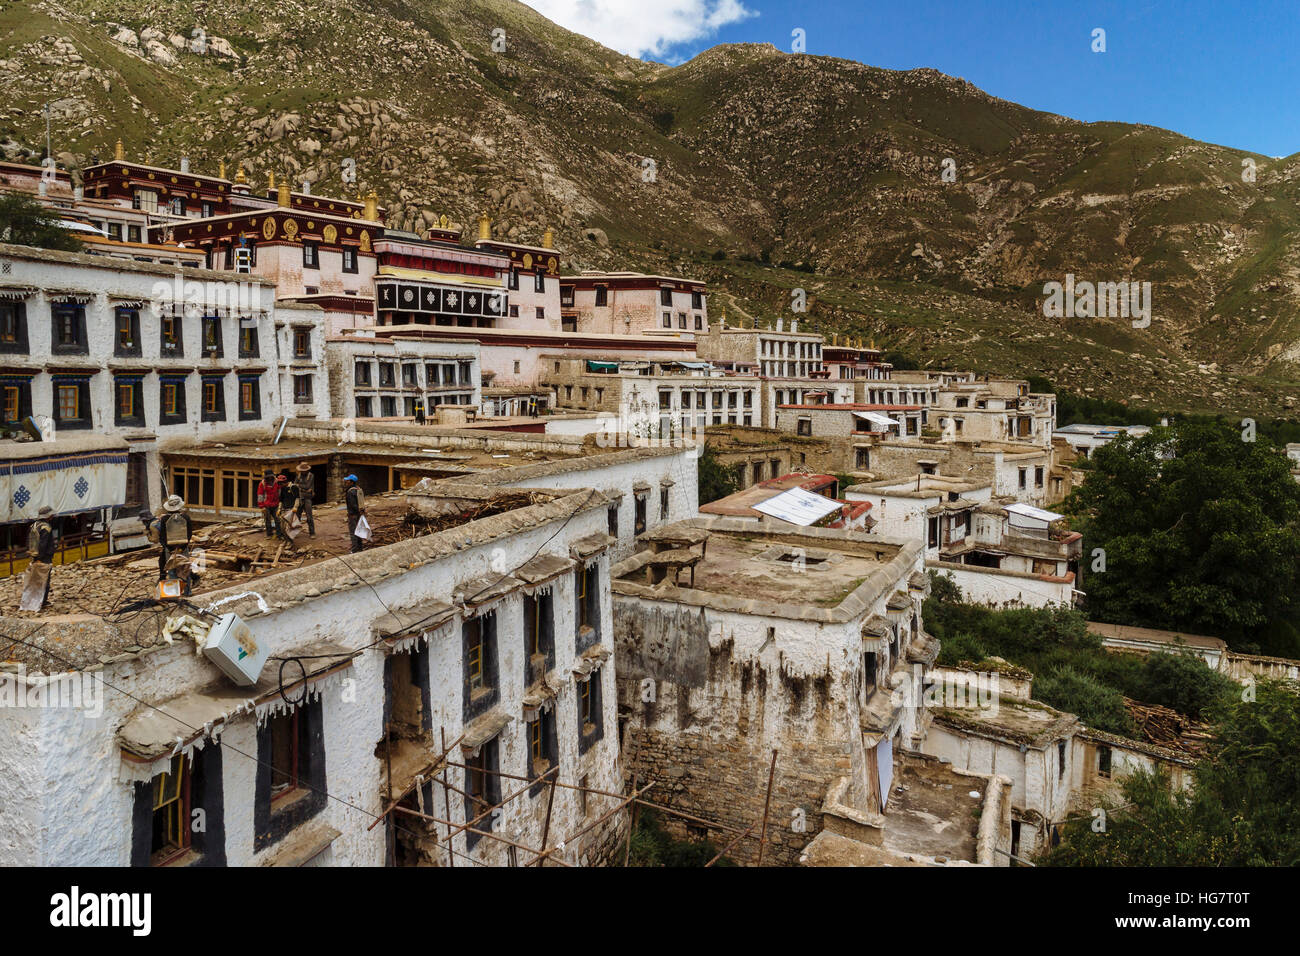 Lhasa, Tibet - The view in Drepung Monastery, the biggest Buddhism Monastery in the world. Stock Photo